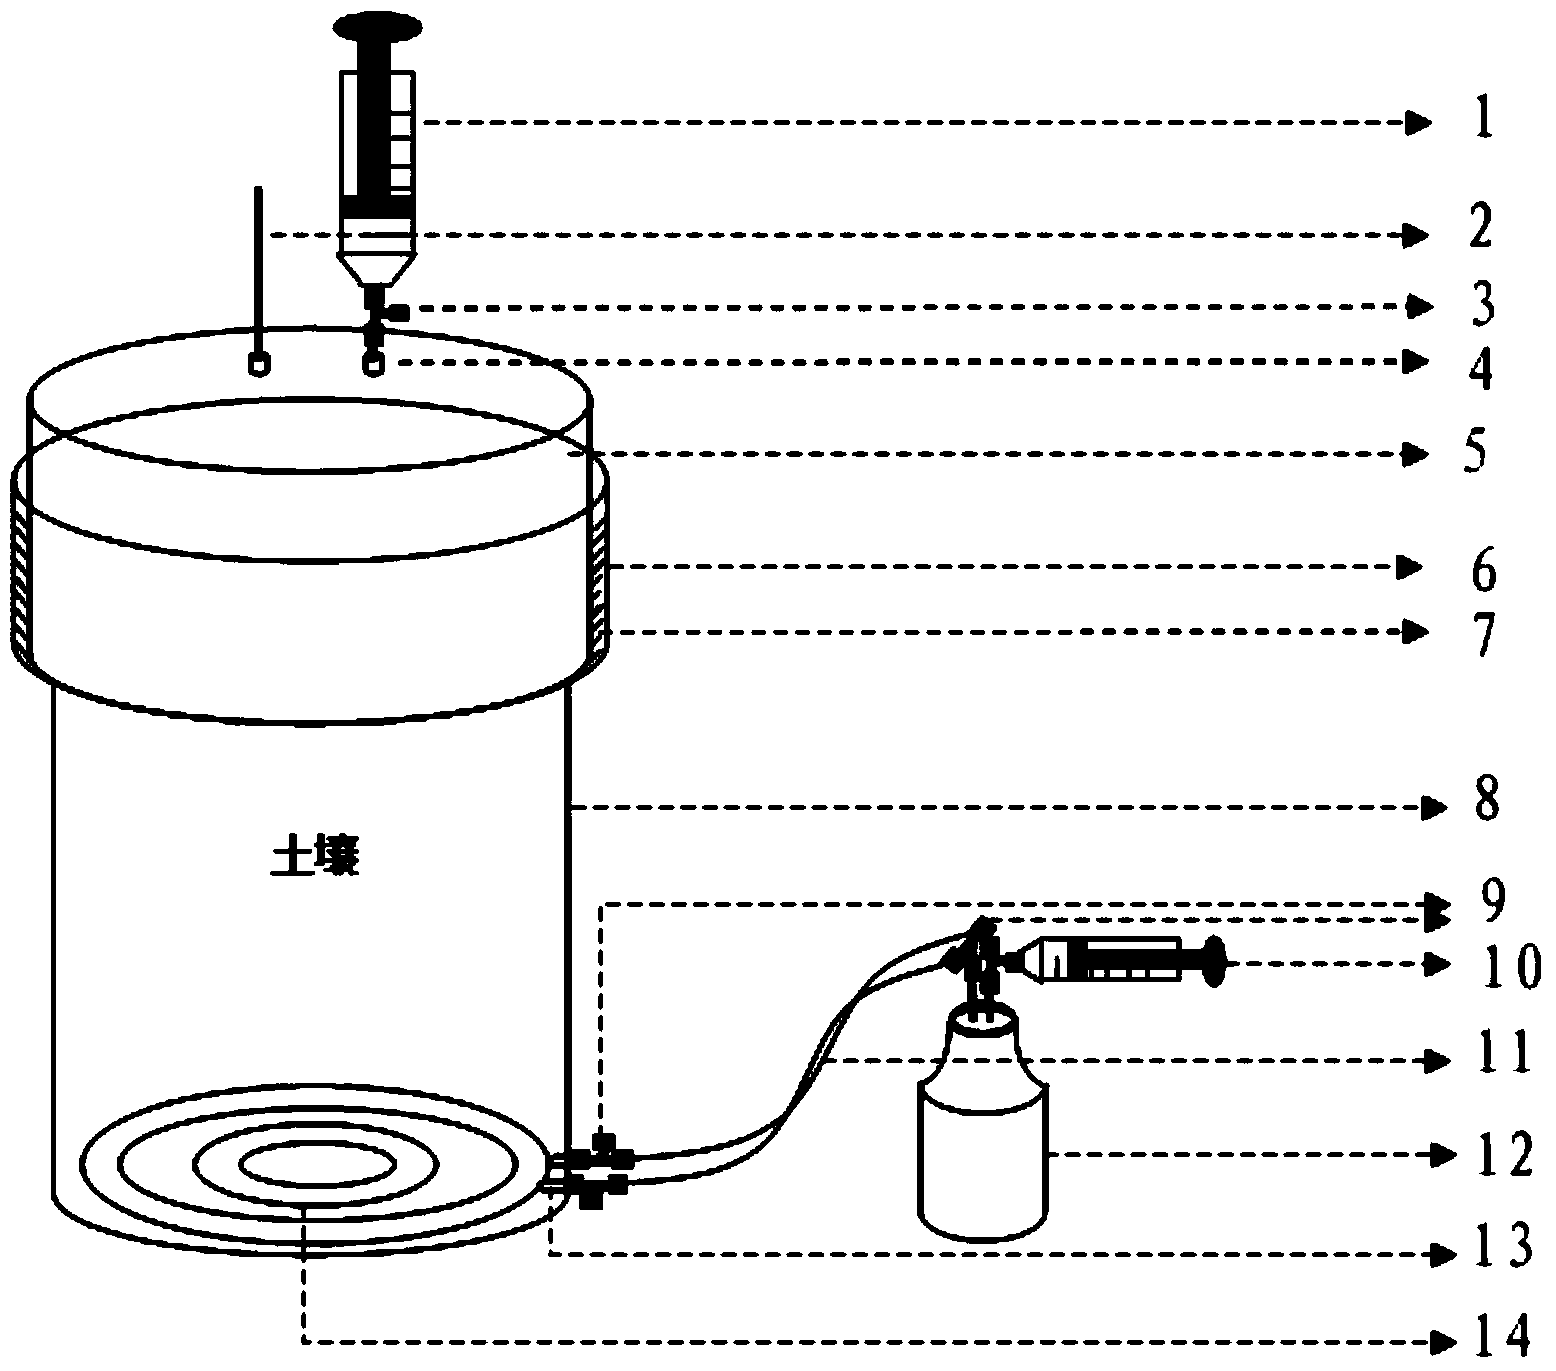 Method and device for determining diffusion and reduction processes of nitrous oxide in soil